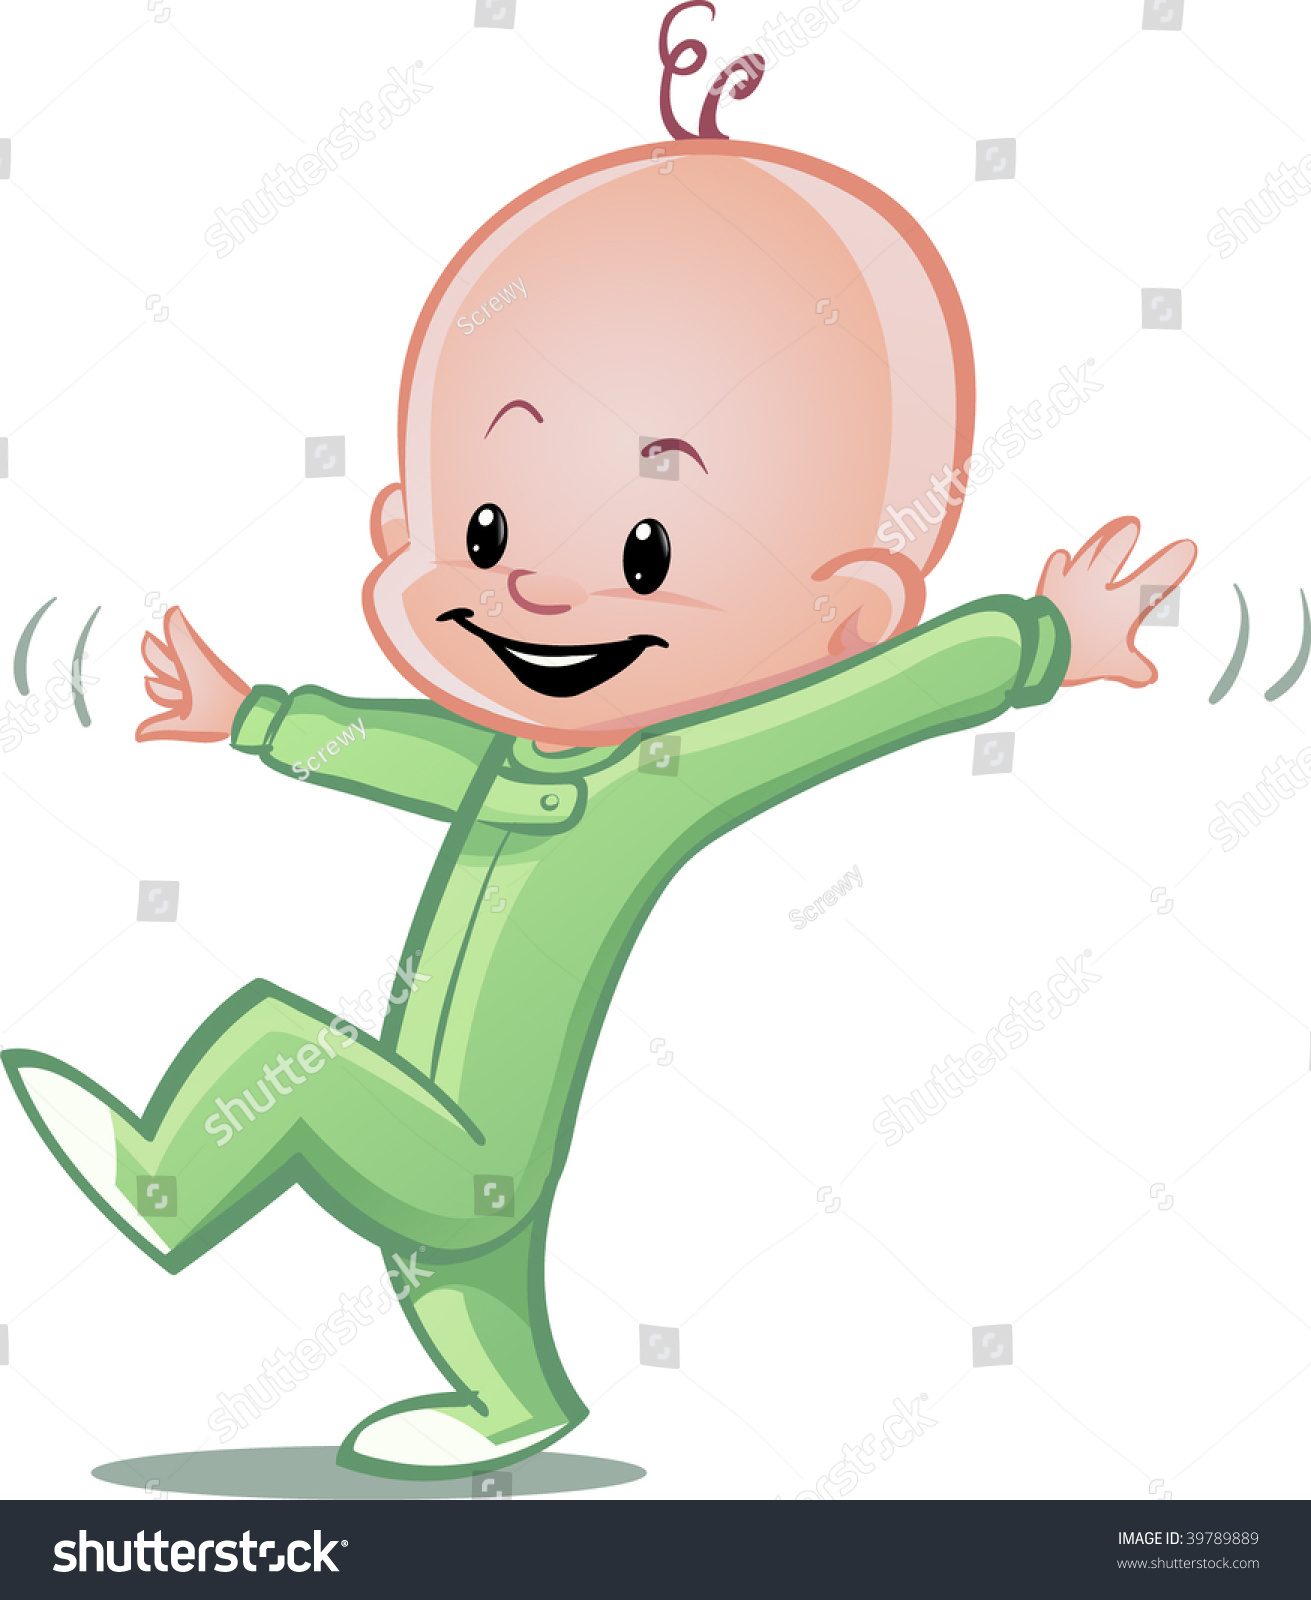 baby steps clipart - photo #17